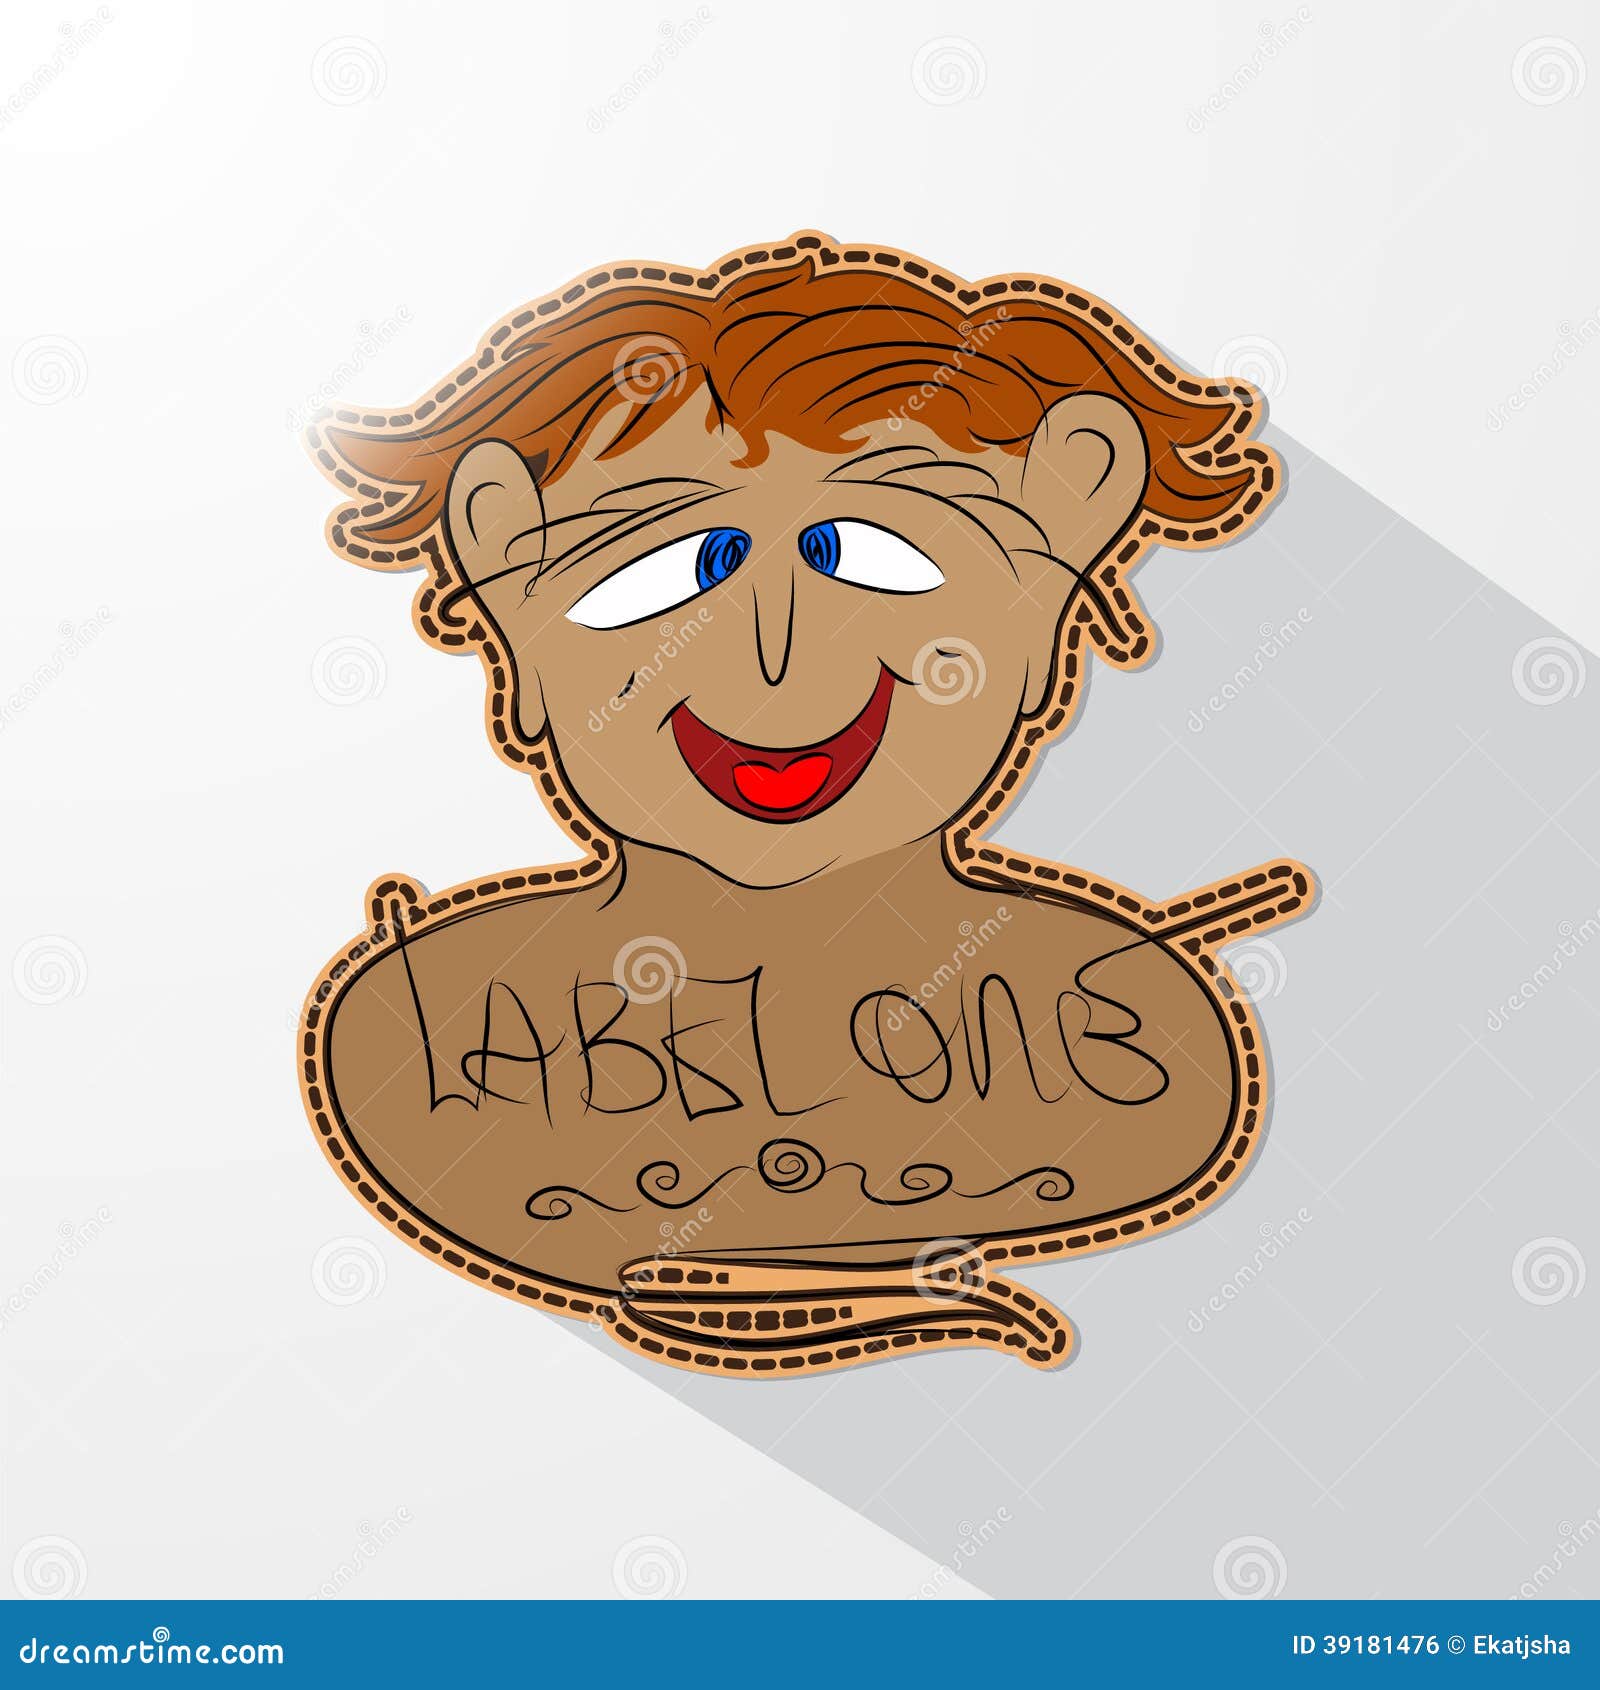 Caricature cartoon human face. You could use it as a label, banner ...